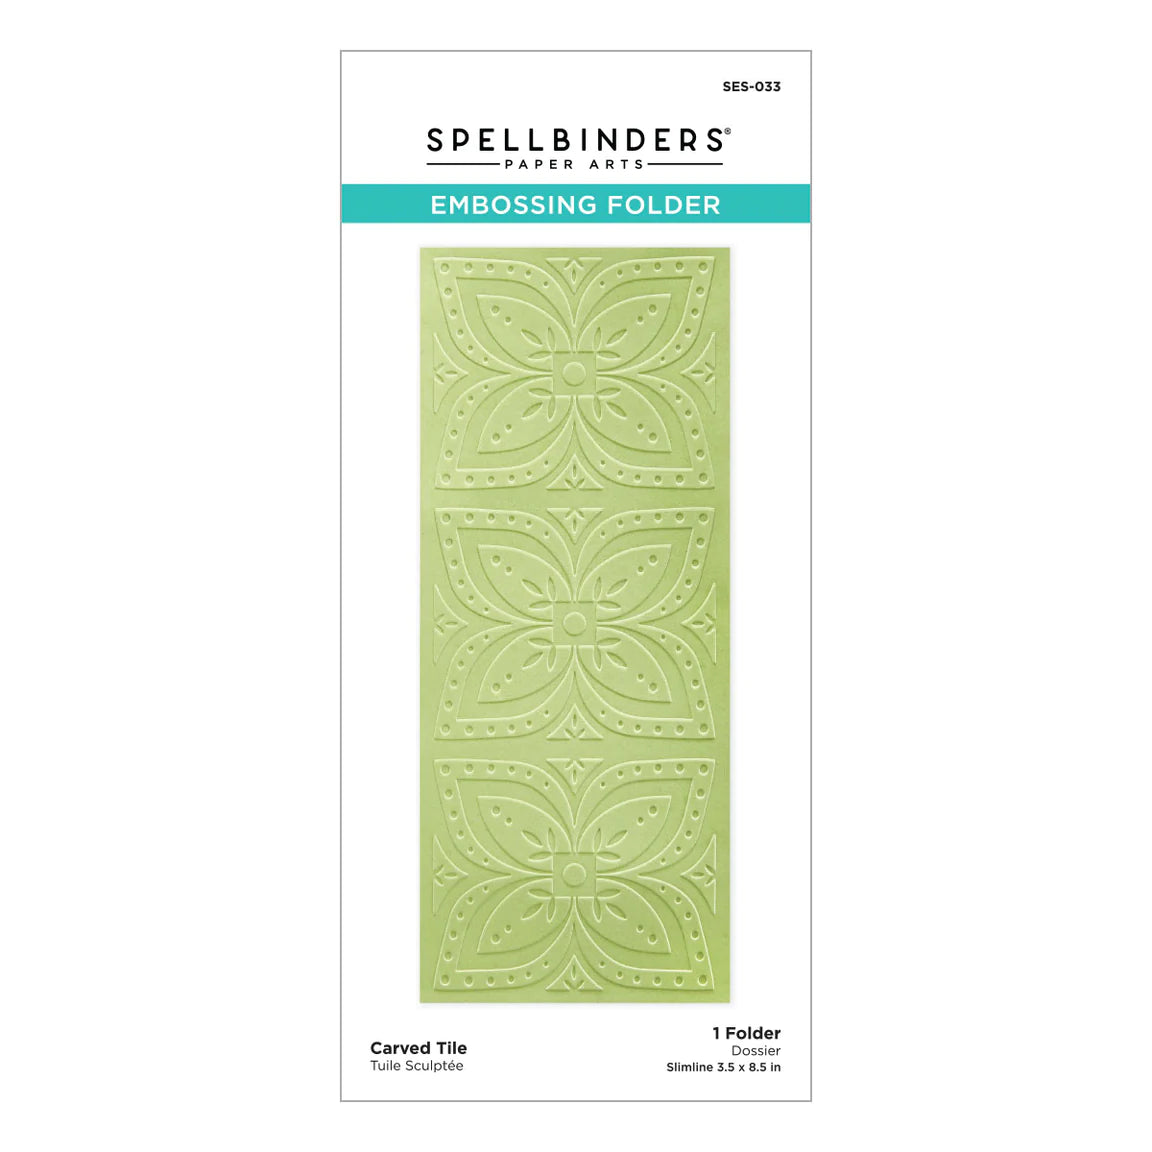 Spellbinders Carved Tile Embossing Folder from the Be Bold Collection